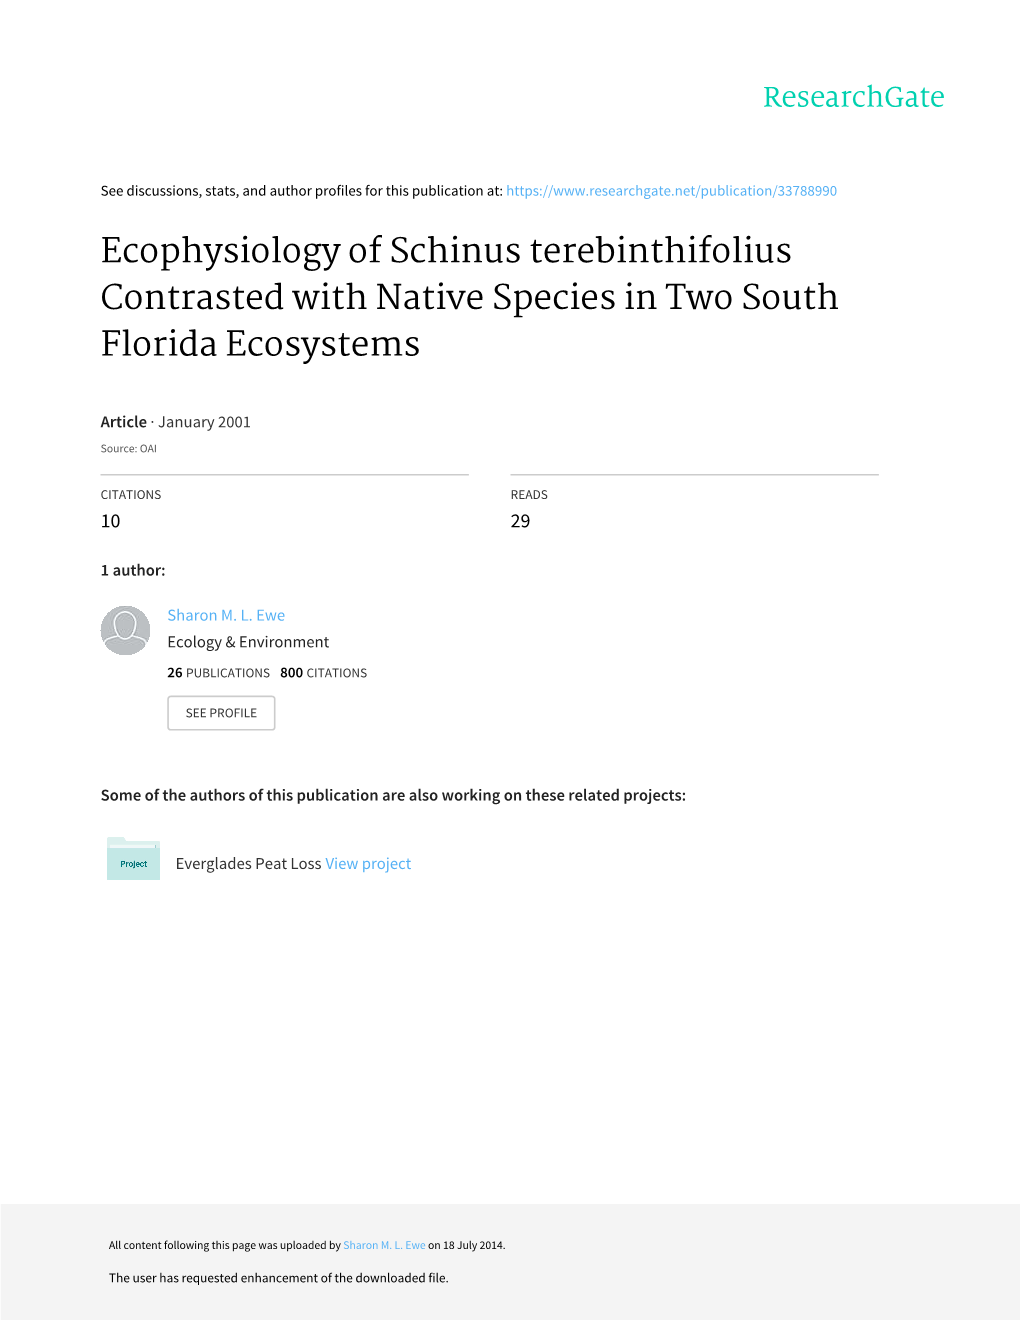 Ecophysiology of Schinus Terebinthifolius Contrasted with Native Species in Two South Florida Ecosystems